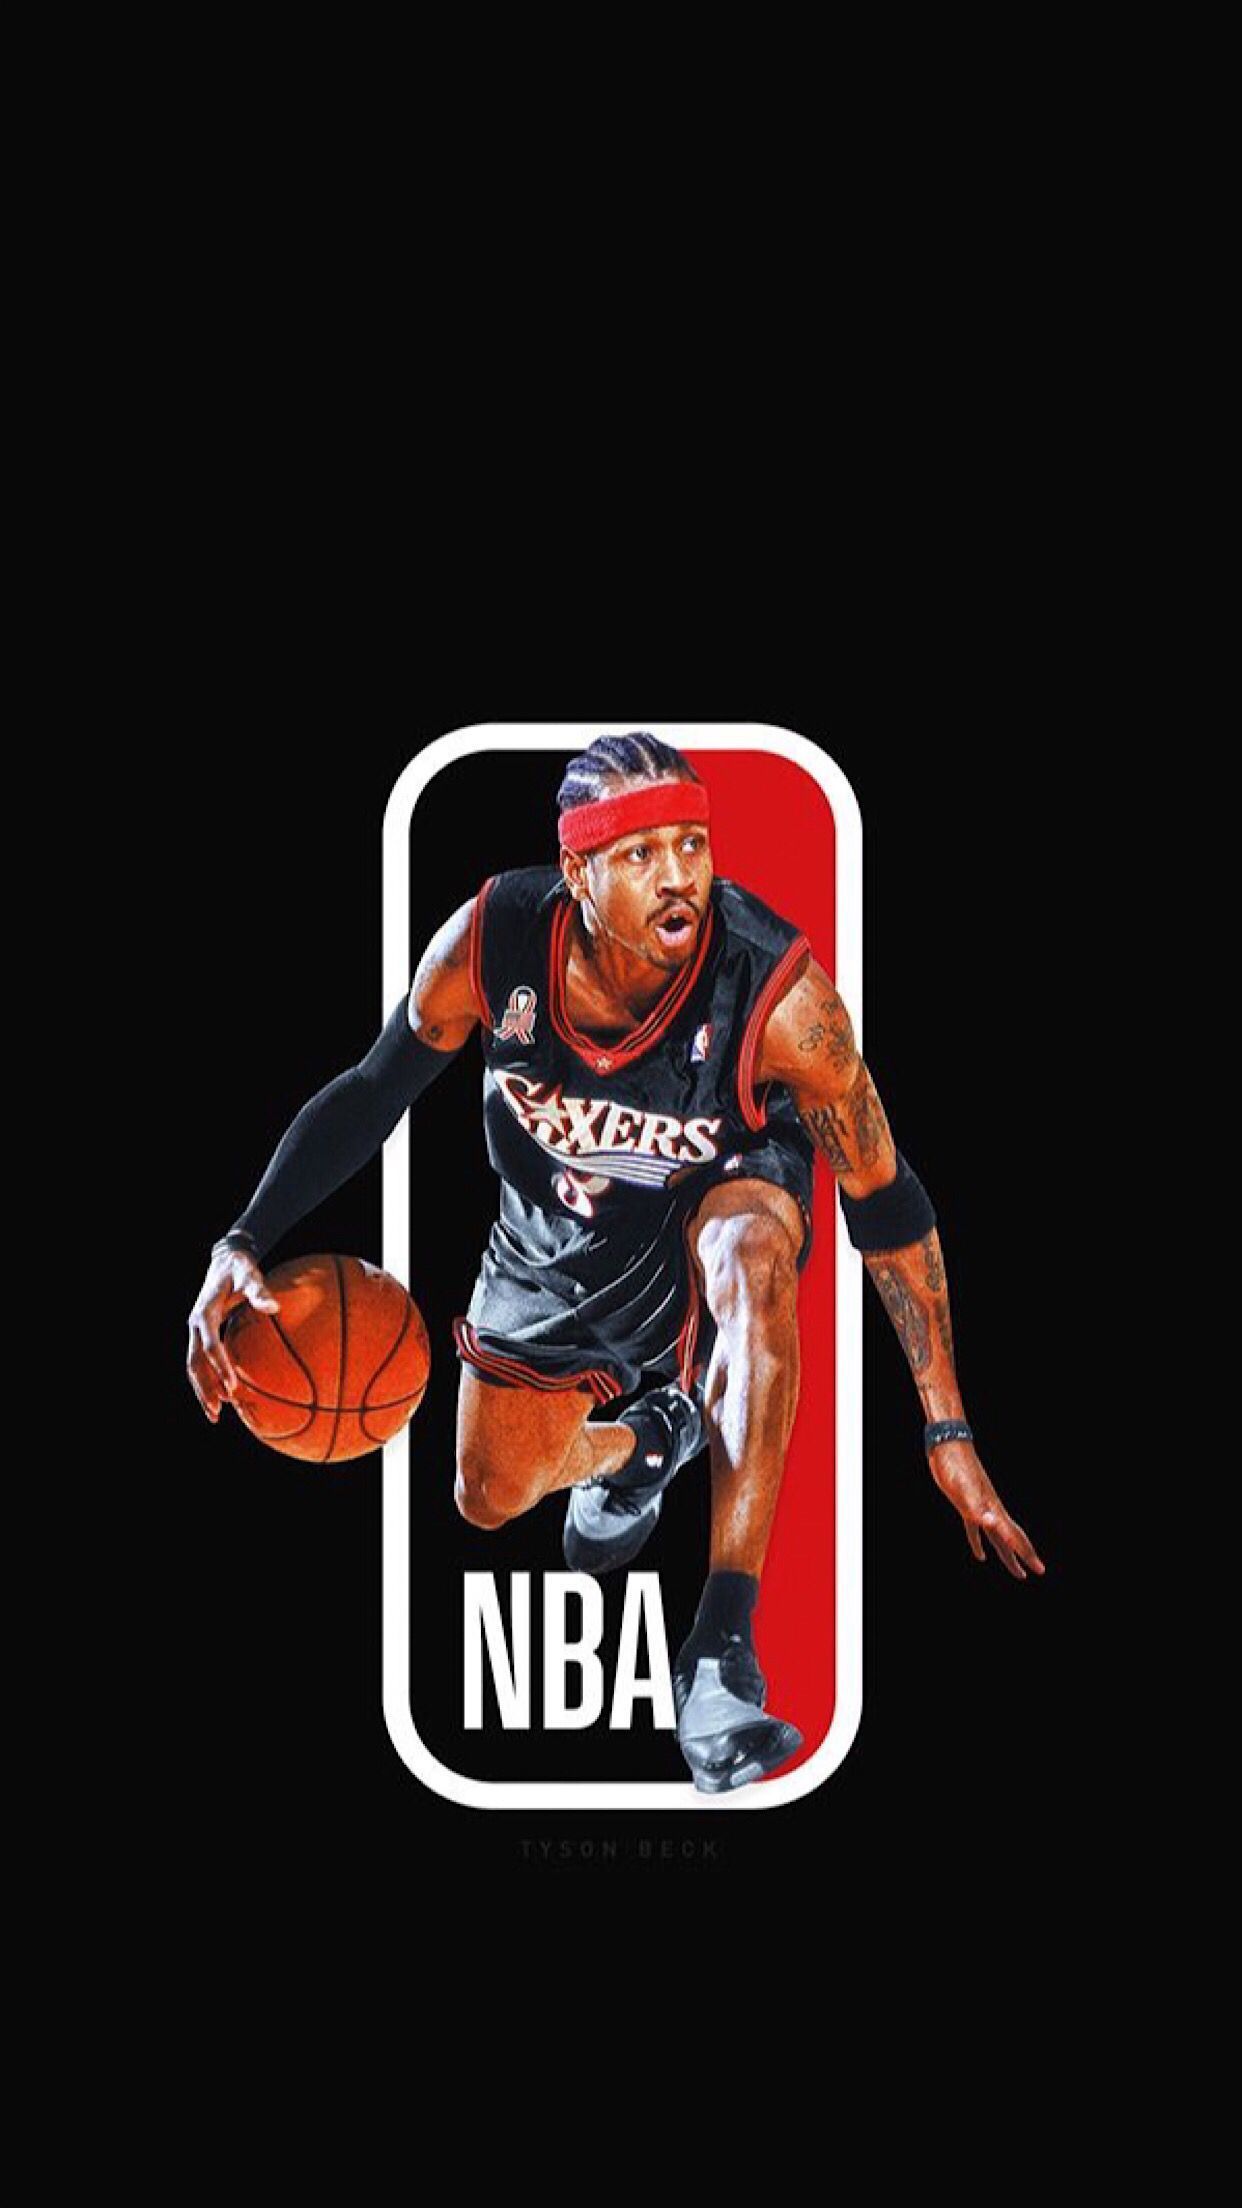 NBA Player iPhone Wallpapers - Wallpaper Cave